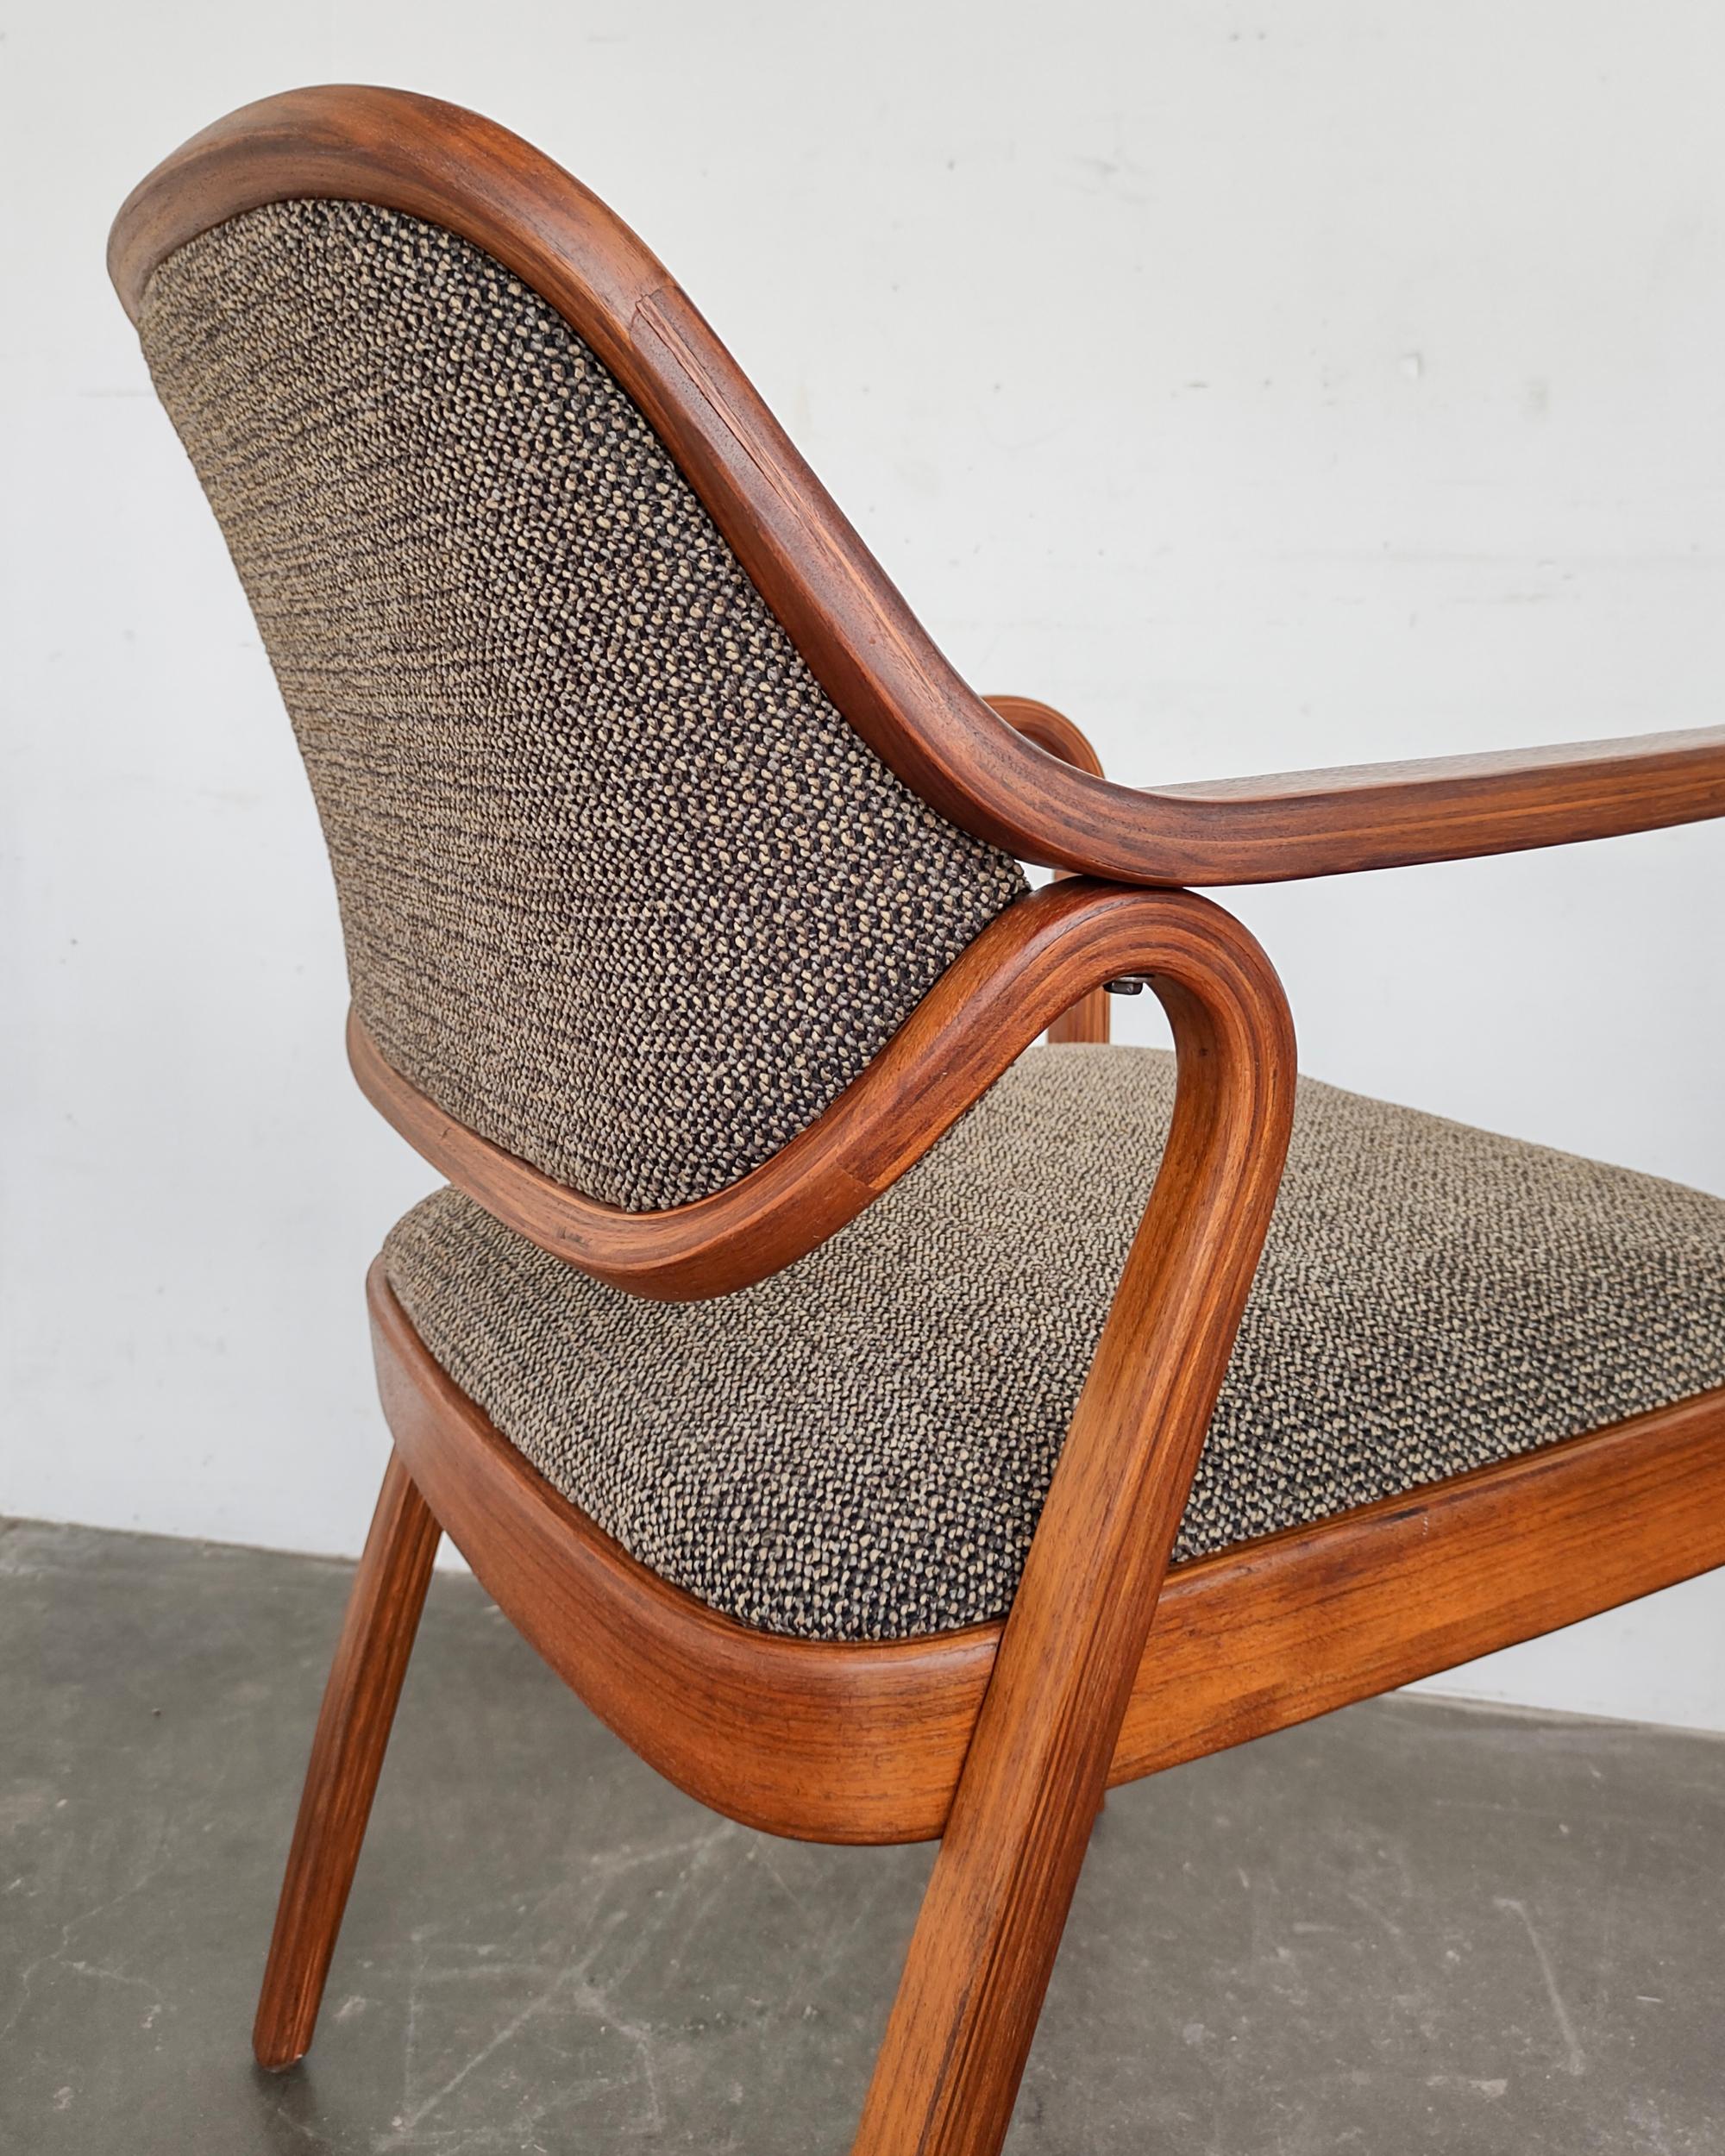 Pair (2) of Bentwood Walnut 1105 Arm Chairs by Don Pettit for Knoll 1